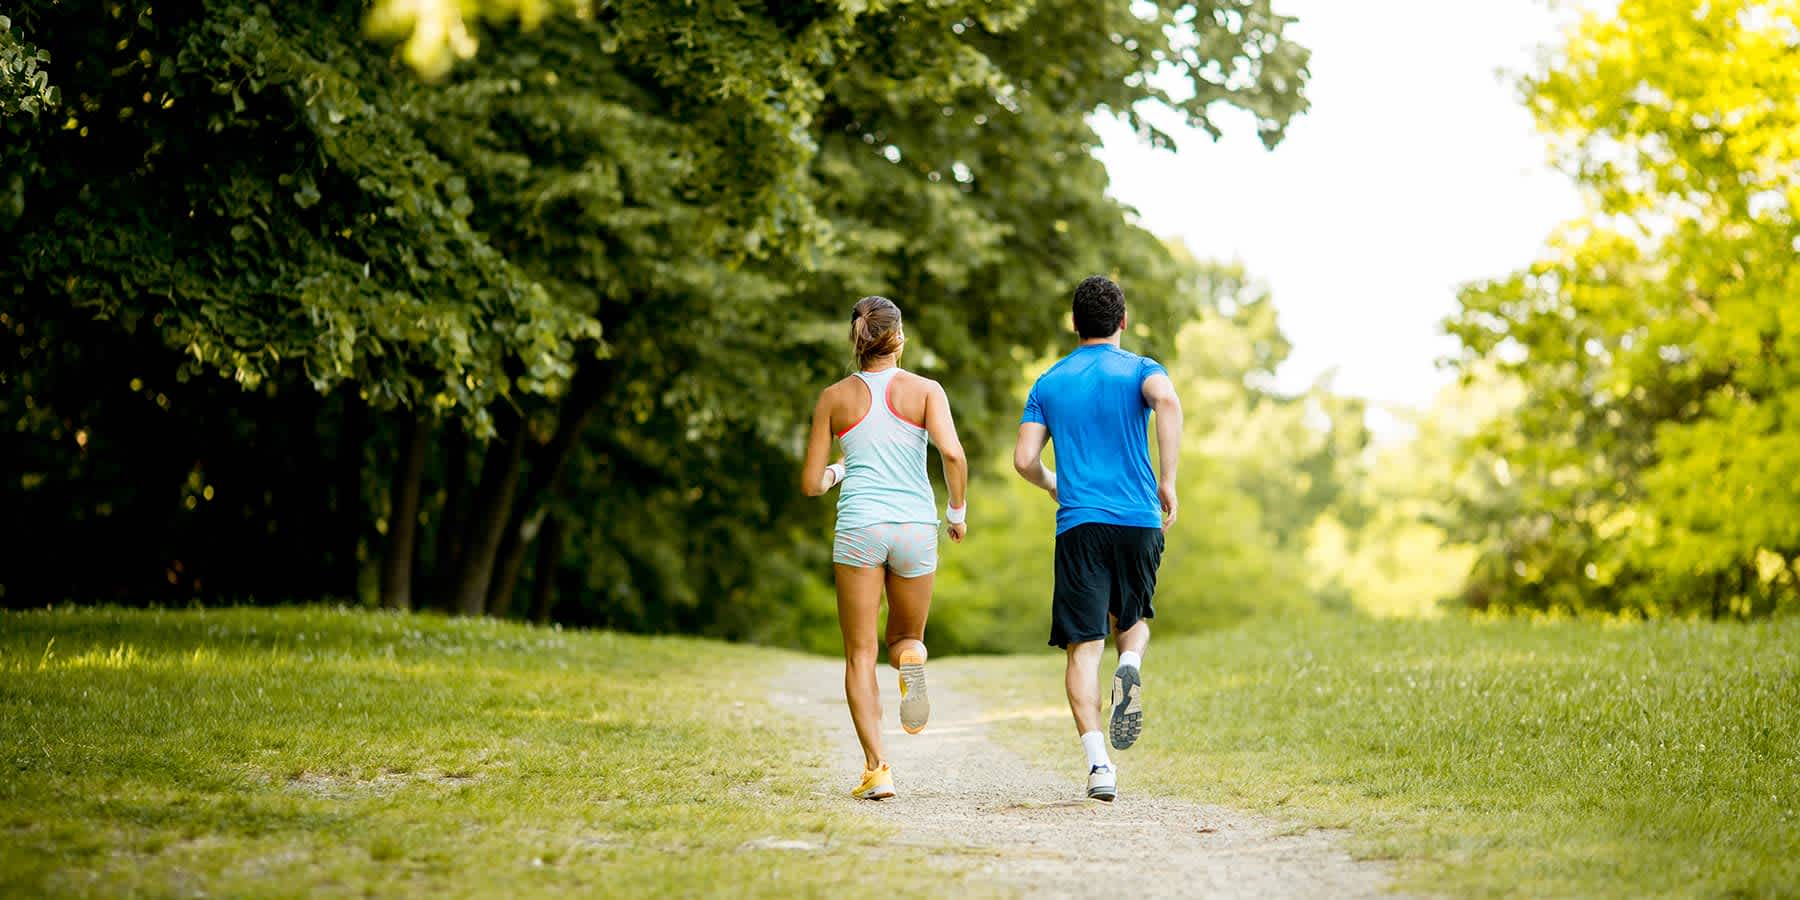 Two people jogging after taking vitamins for energy